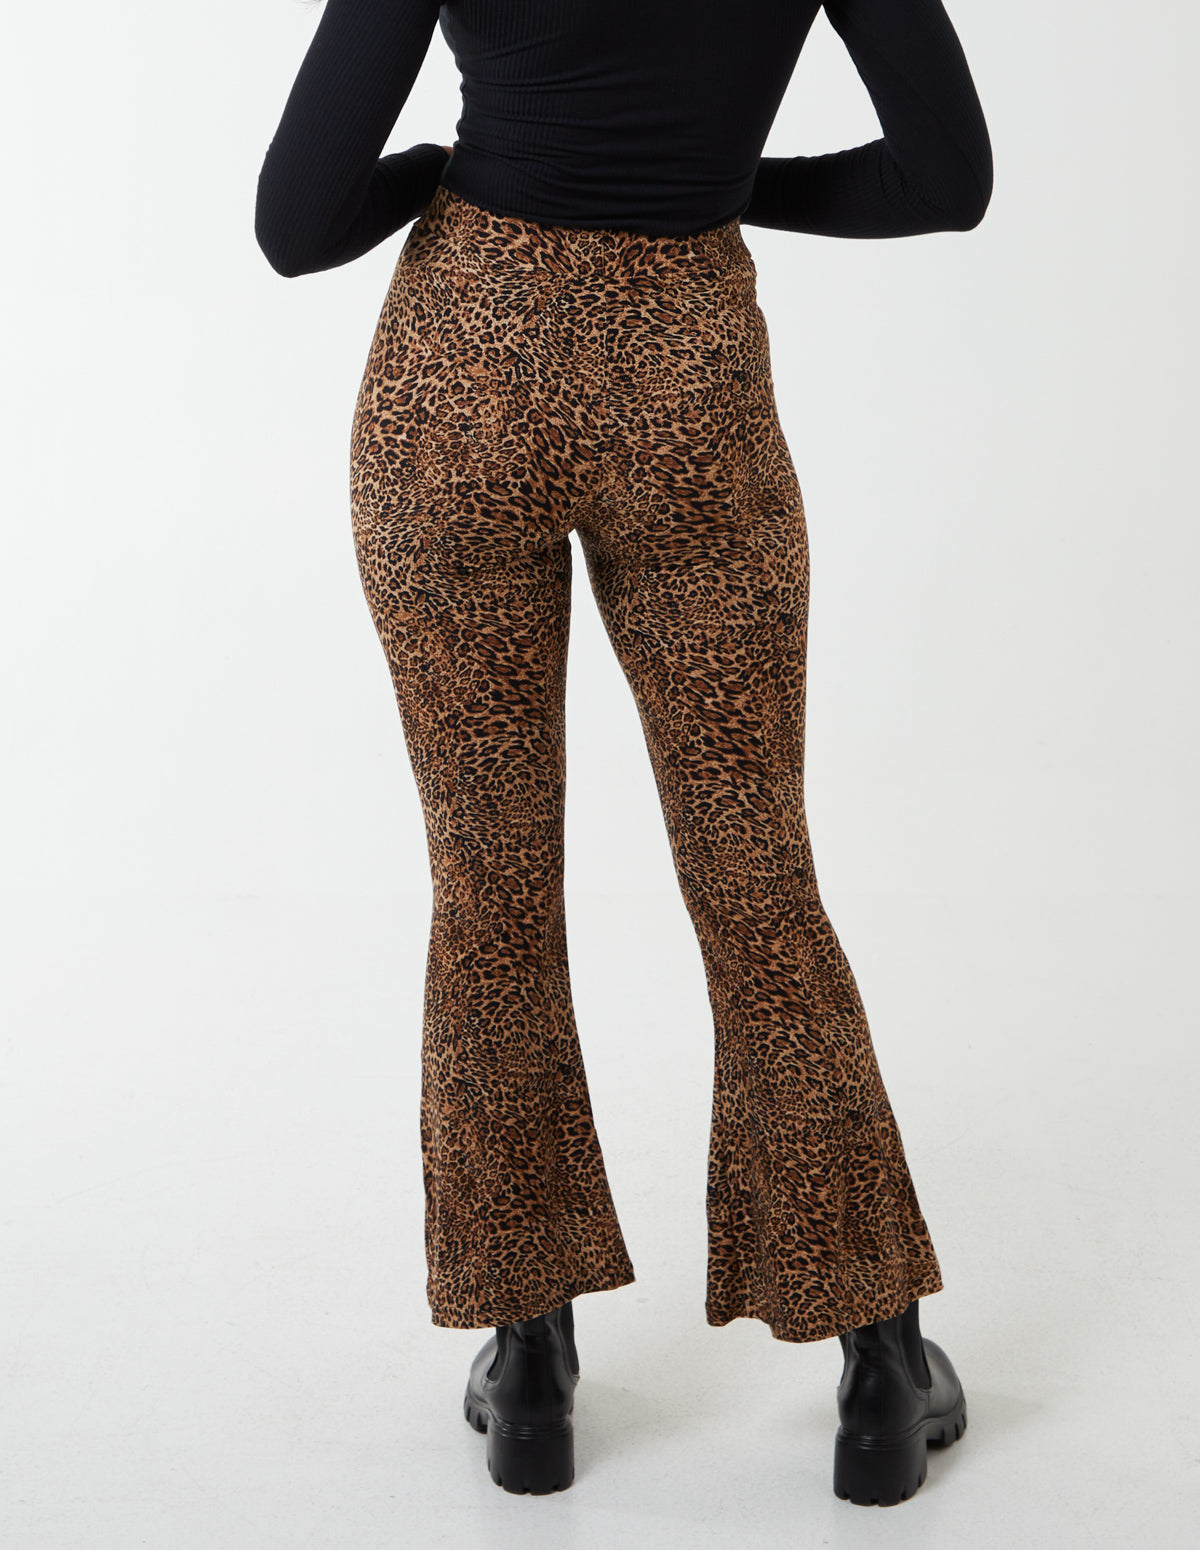 Leopard Print Flared High Waisted Tan Trousers by Blue Vanilla